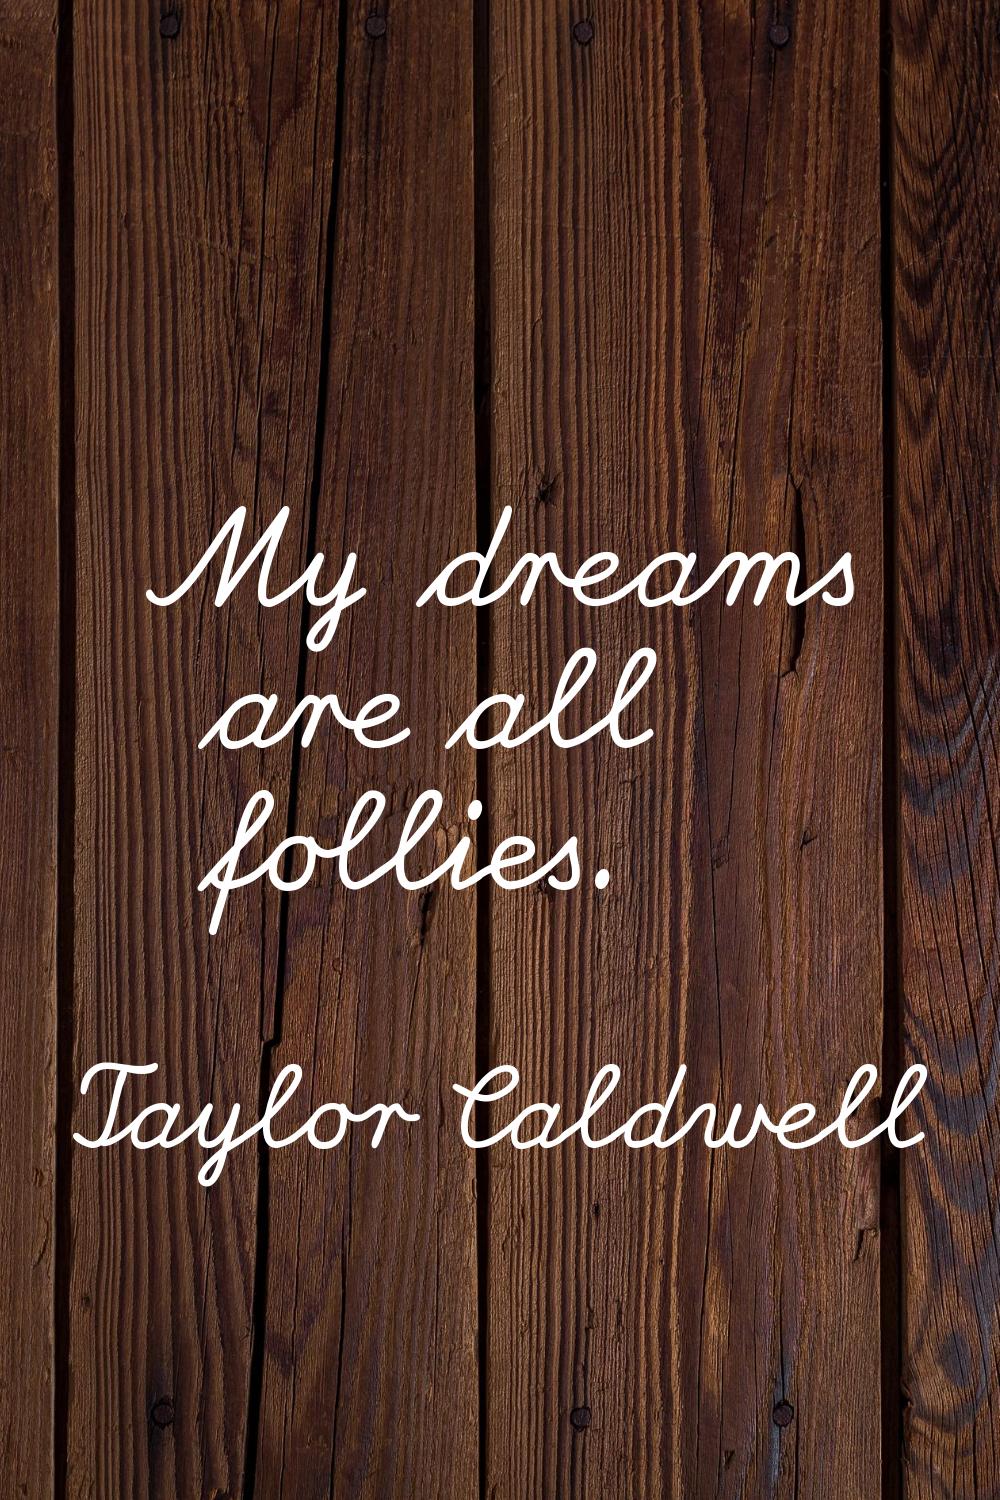 My dreams are all follies.